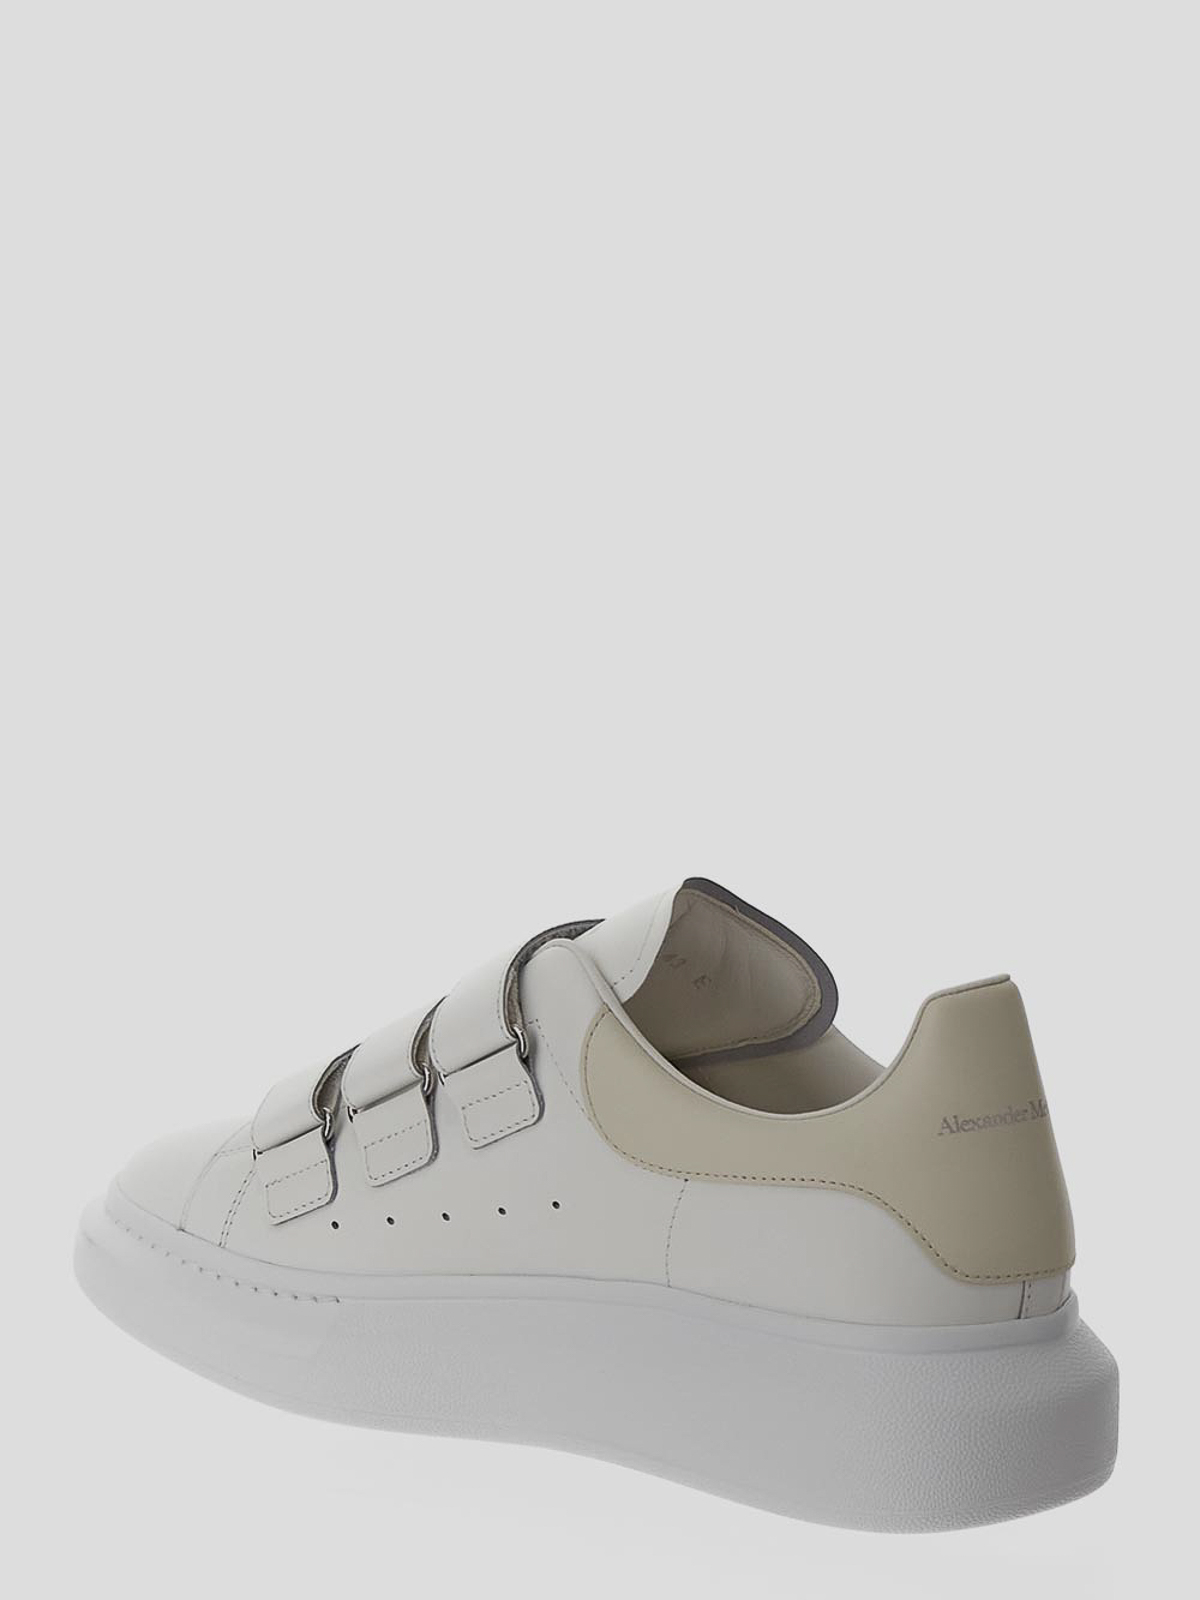 ALEXANDER MCQUEEN Outlet: leather sneakers - White | ALEXANDER MCQUEEN  shoes 687070WHX12 online at GIGLIO.COM